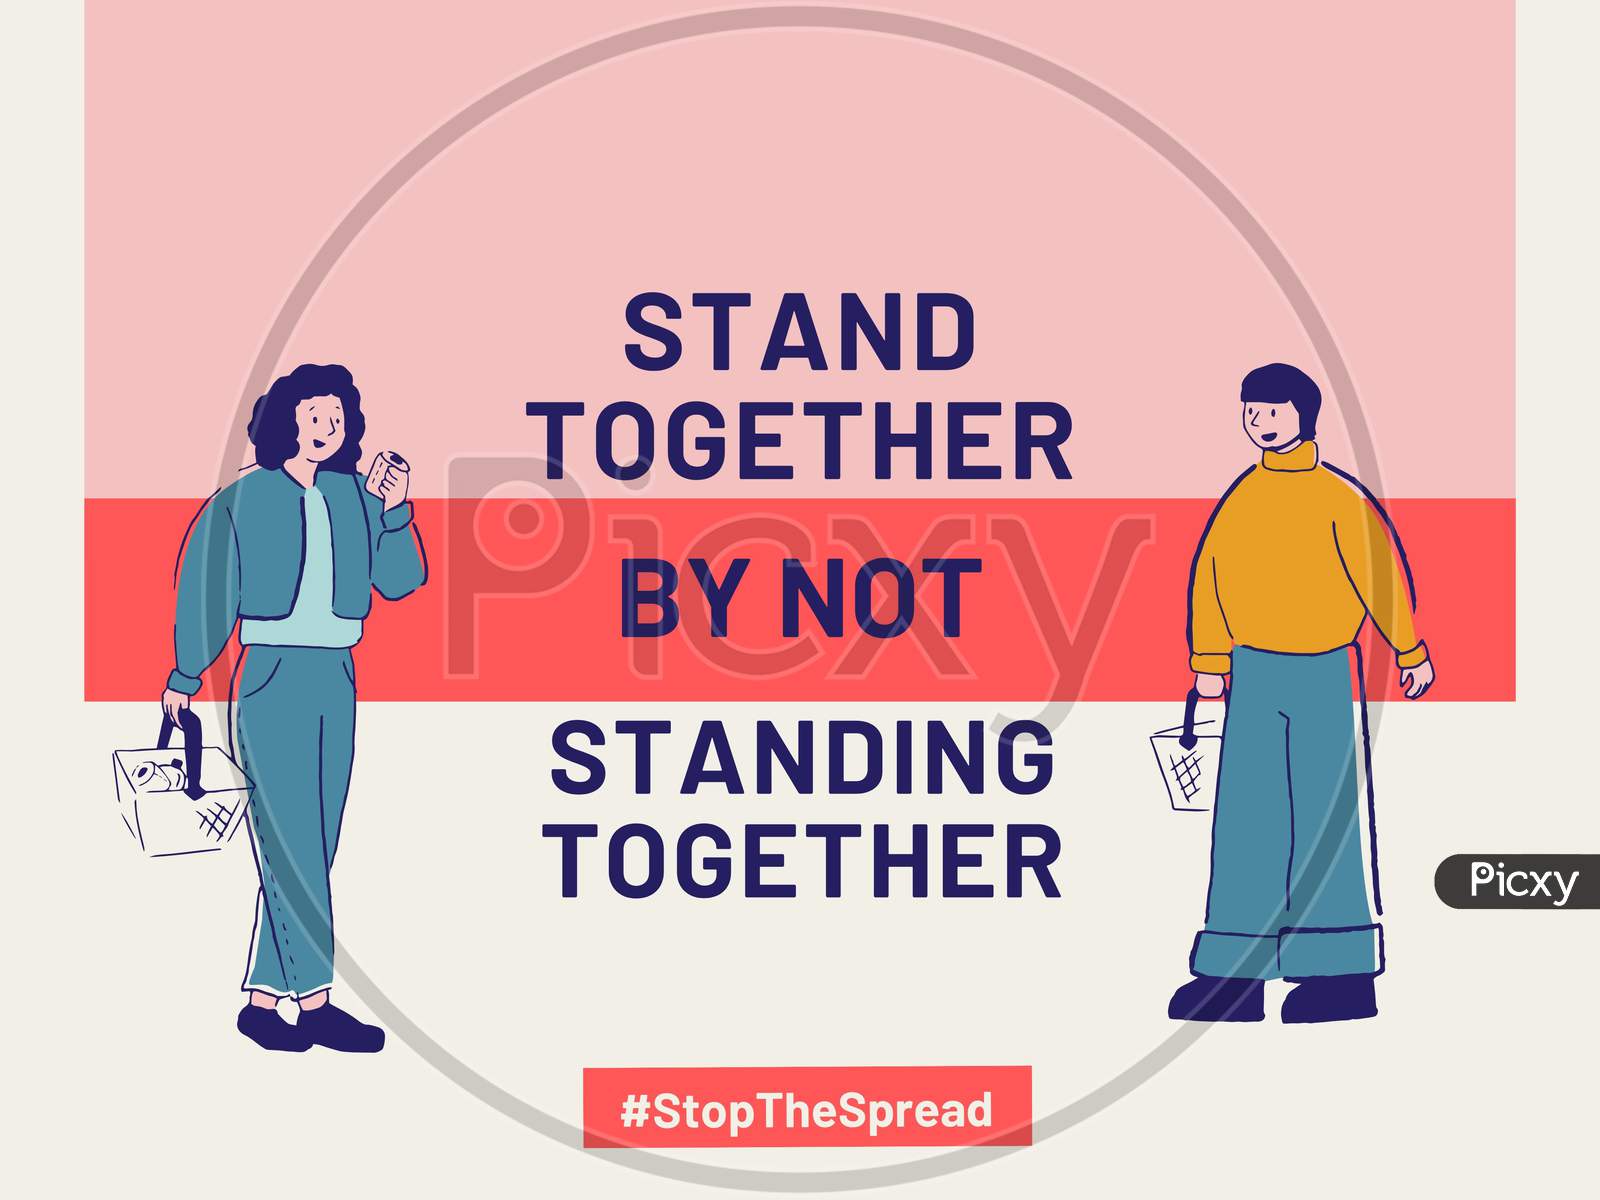 Social distancing message- Stand together by not standing together to stop the spread